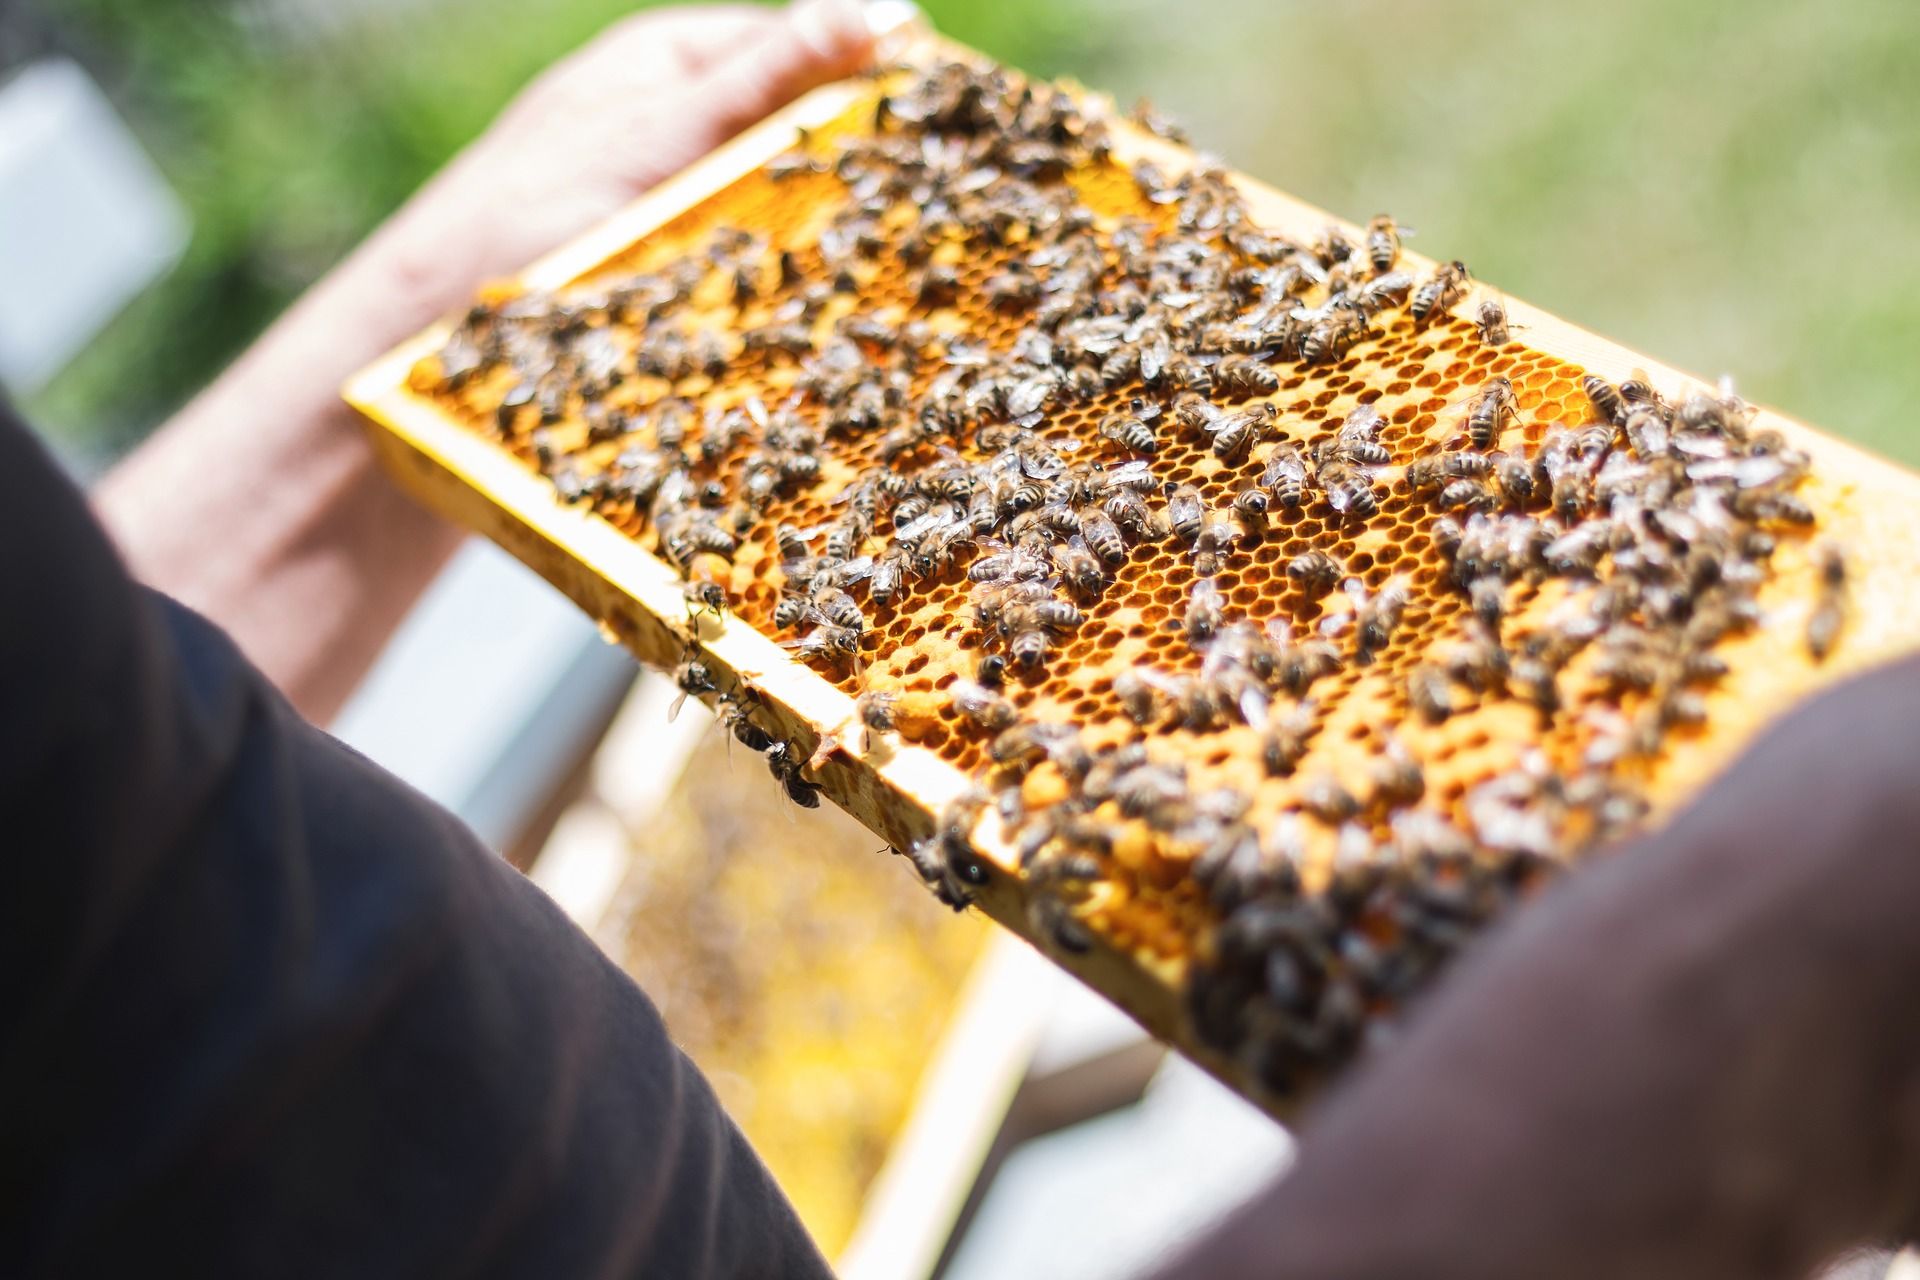 Want to 'bee' a beekeeper?